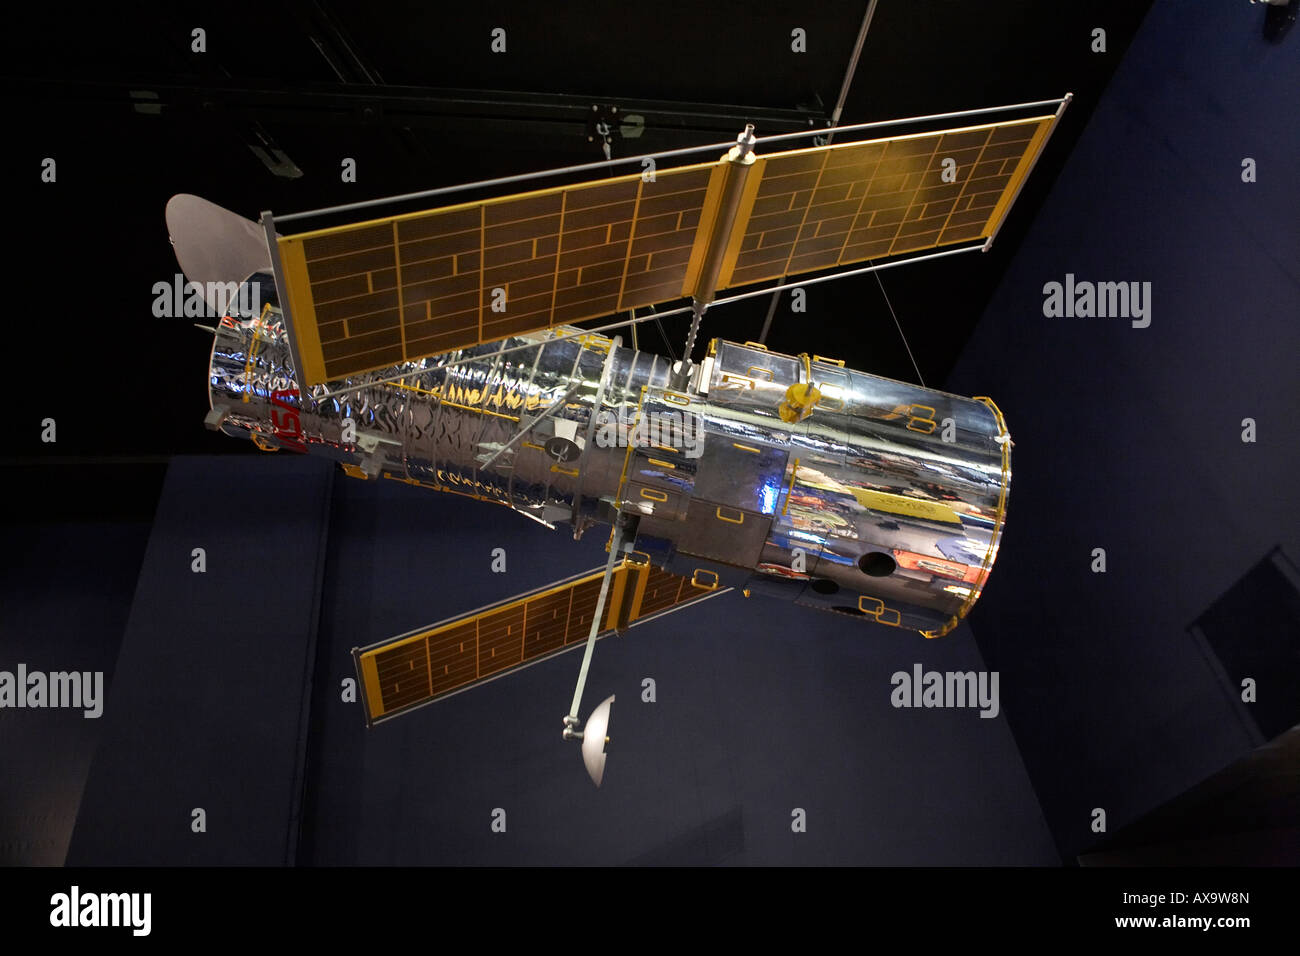 The Hubble Telescope, seen here in the Science Museum, London. Stock Photo